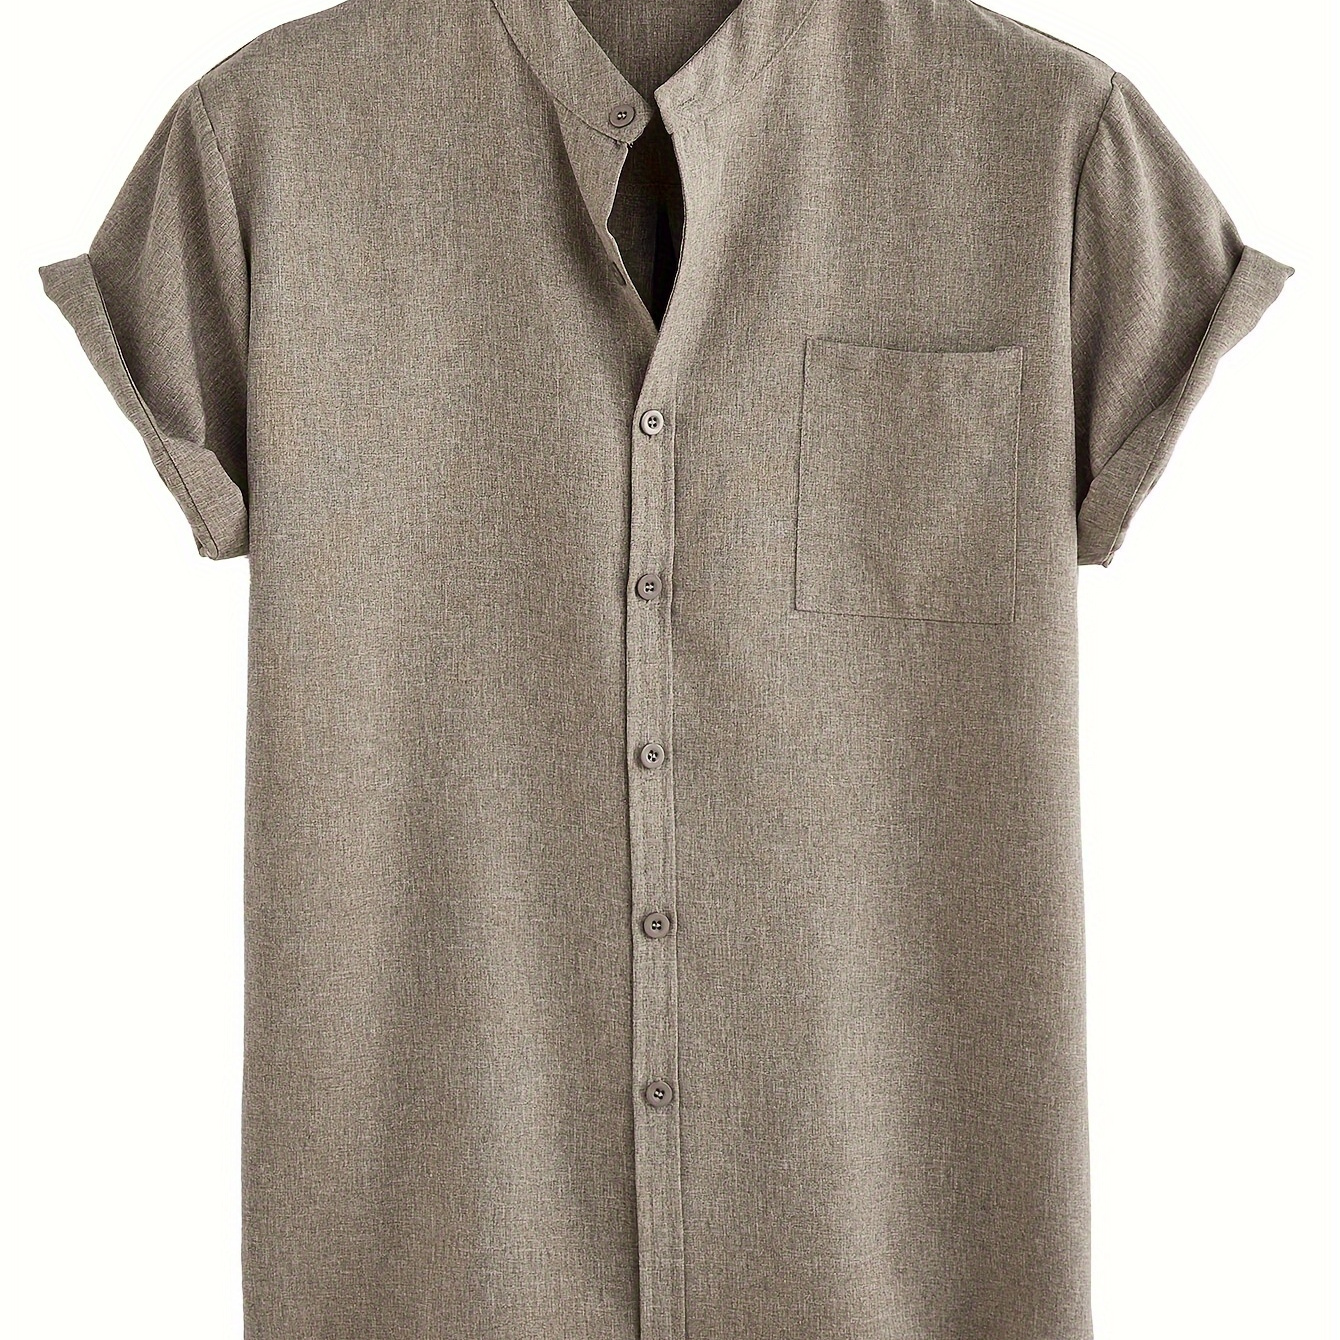 

Men's Solid Short Sleeve And Button Down Lapel Shirt With Breasted Pocket, Casual And Chic For Summer Leisurewear